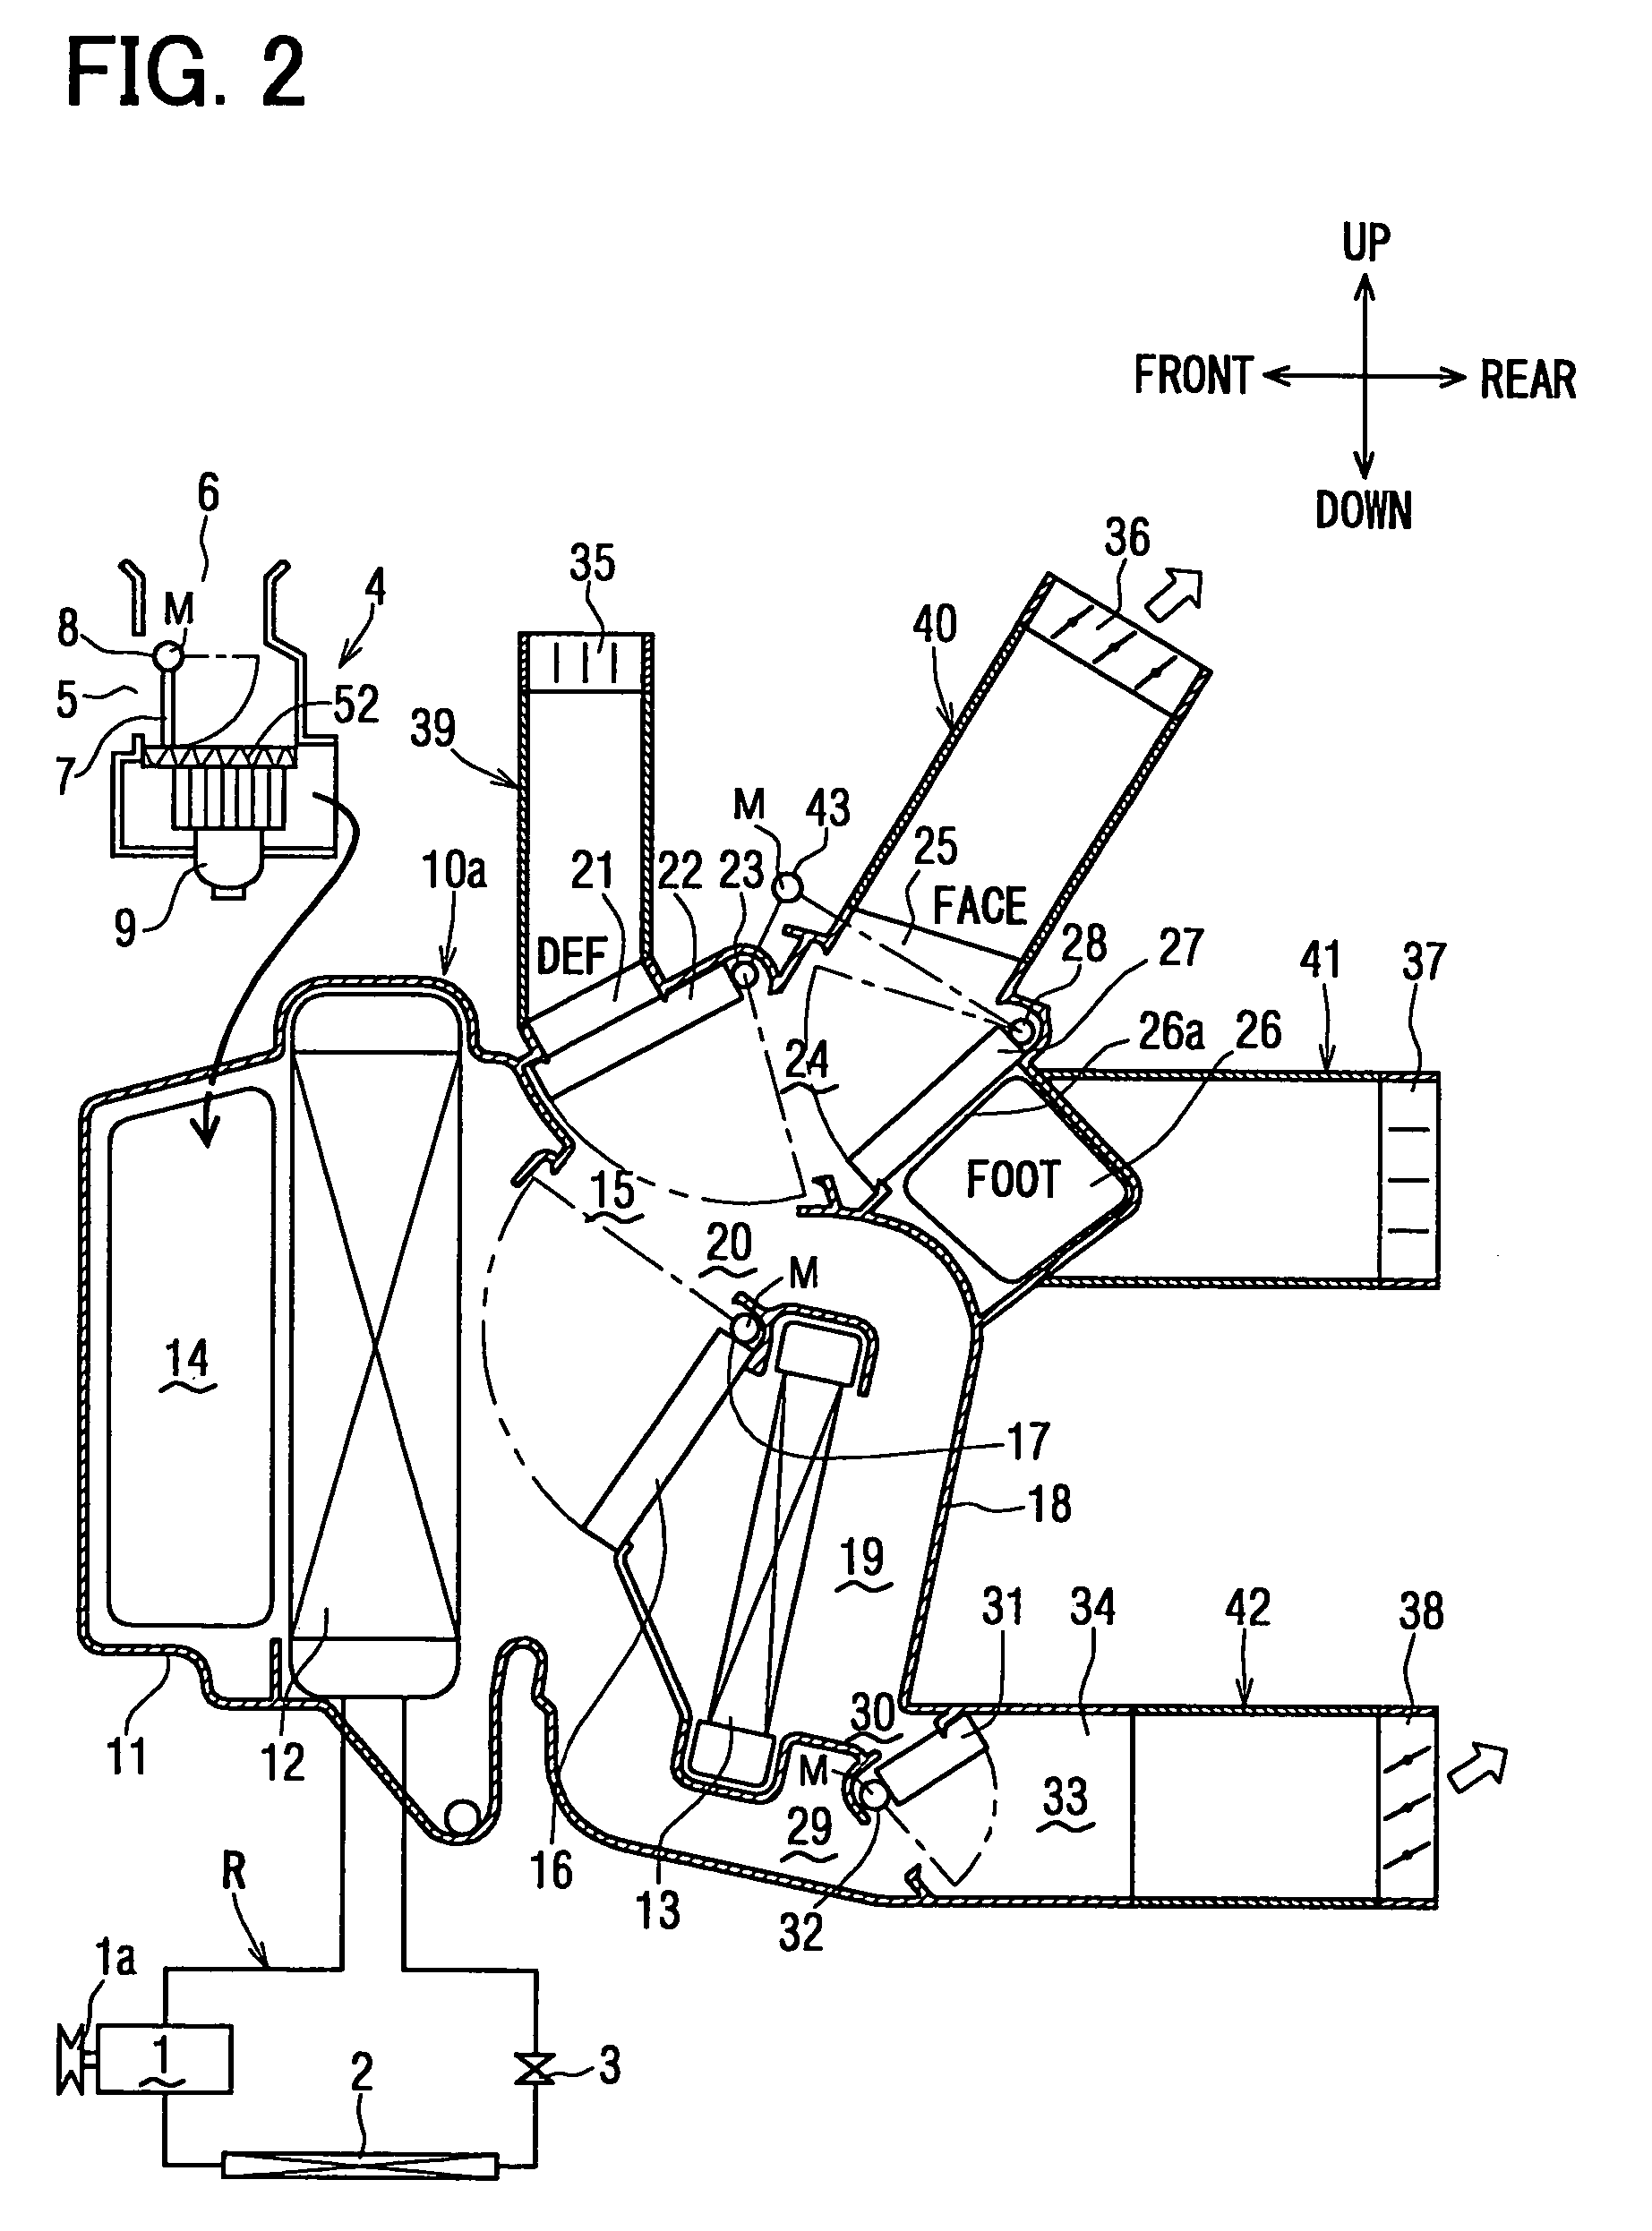 Vehicle ventilation and deodorization system